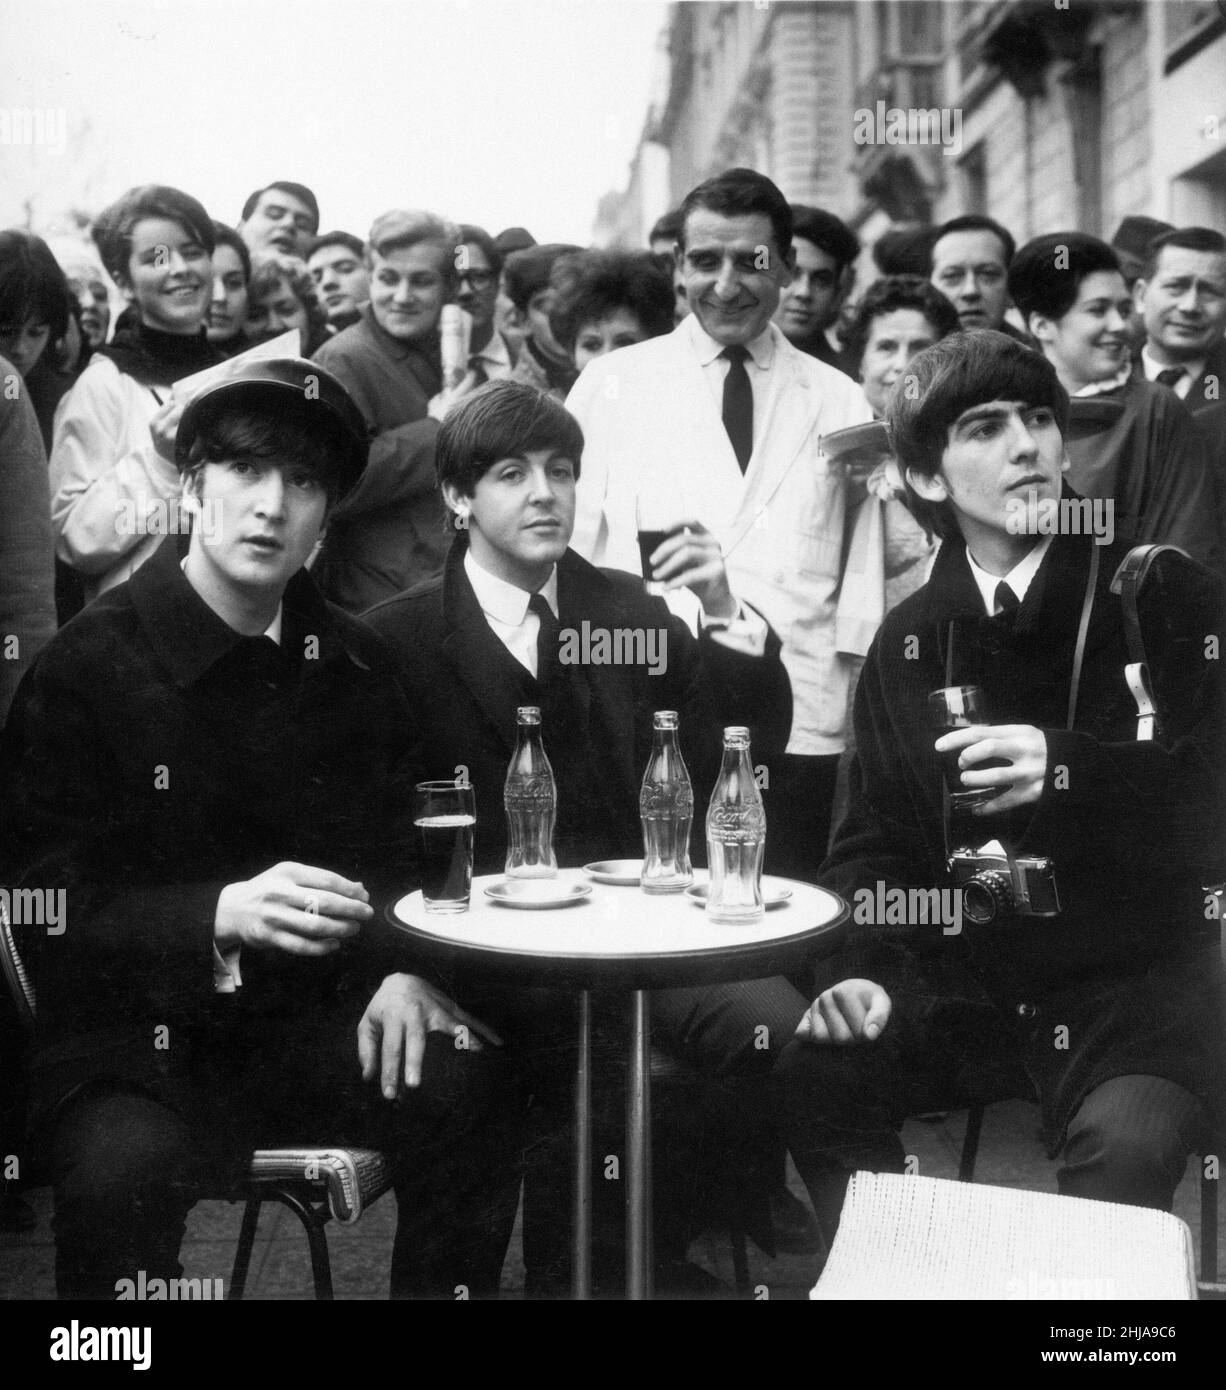 Three Beatles - John, Paul and George enjoy a glass of coca cola at a street cafe in Paris France 15th January 1964.  George is carrying his Pentax Camera.  The Beatles performed at the Olympia Theatre Paris, continuing their 18 date residency which began on 16 January 1964 and ended on 4 February.   It was in Paris, that they learnt that they were number one in the American charts, which prompted a visit to New York the following week, where they conquered America first appearing on The Ed Sullivan Show.  Picture taken 15th January 1964 Stock Photo